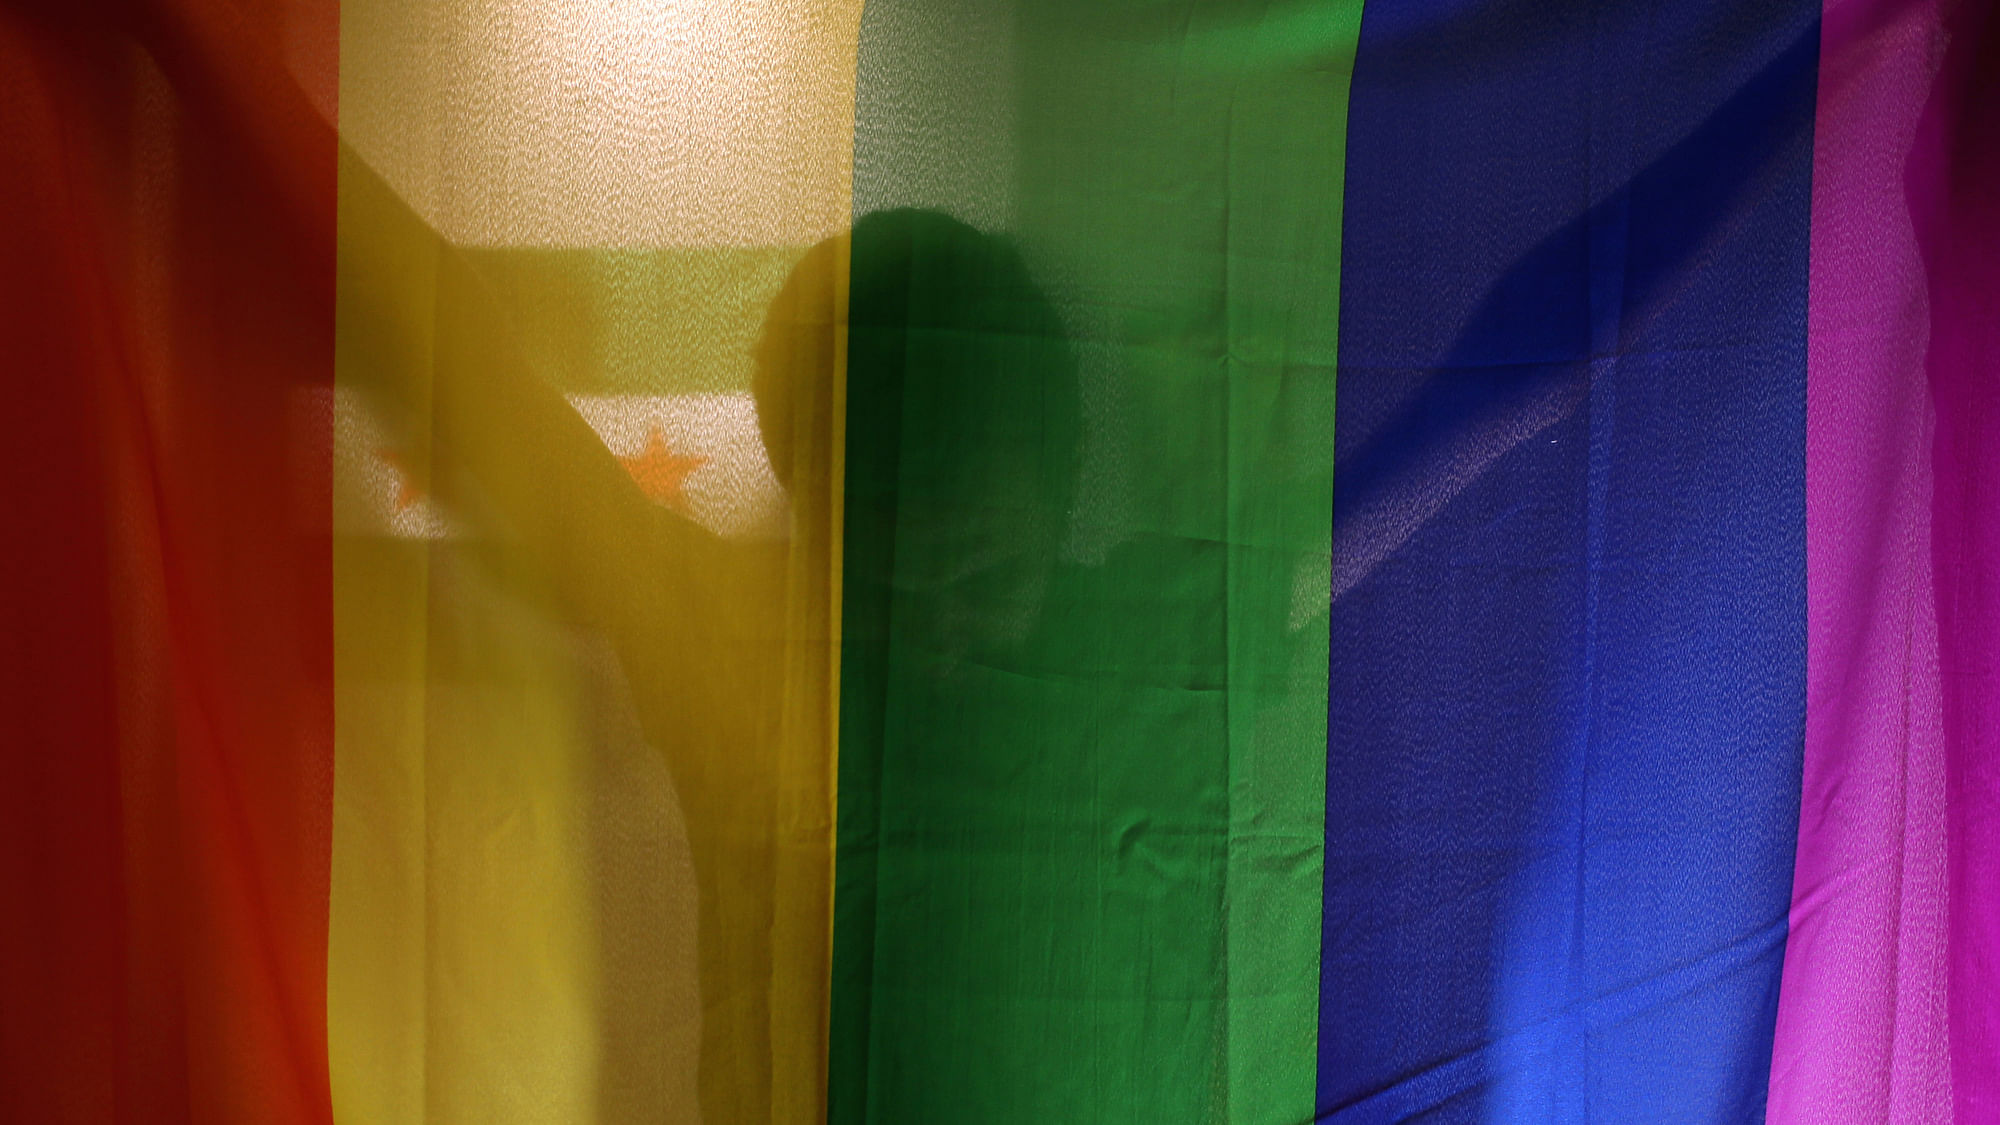 Daniel Halaby, a gay Syrian who fled from the Islamic State group, poses with the rainbow flag symbolic of LGBT rights in his apartment in southern Turkey. (Photo: AP)